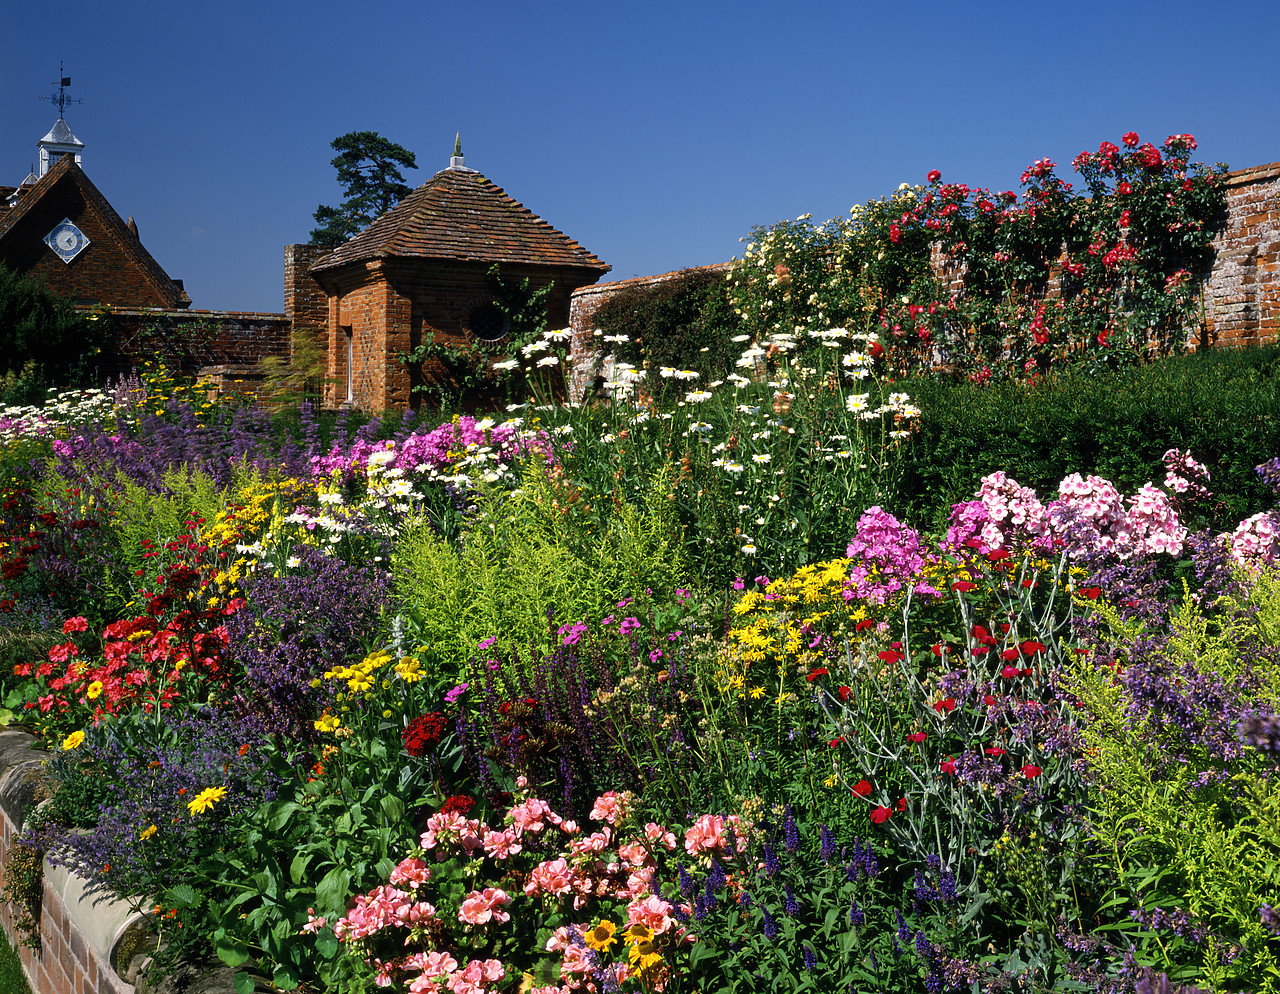 #892328-2 - Walled Garden at Packwood House, Lapworth, Warwickshire, England